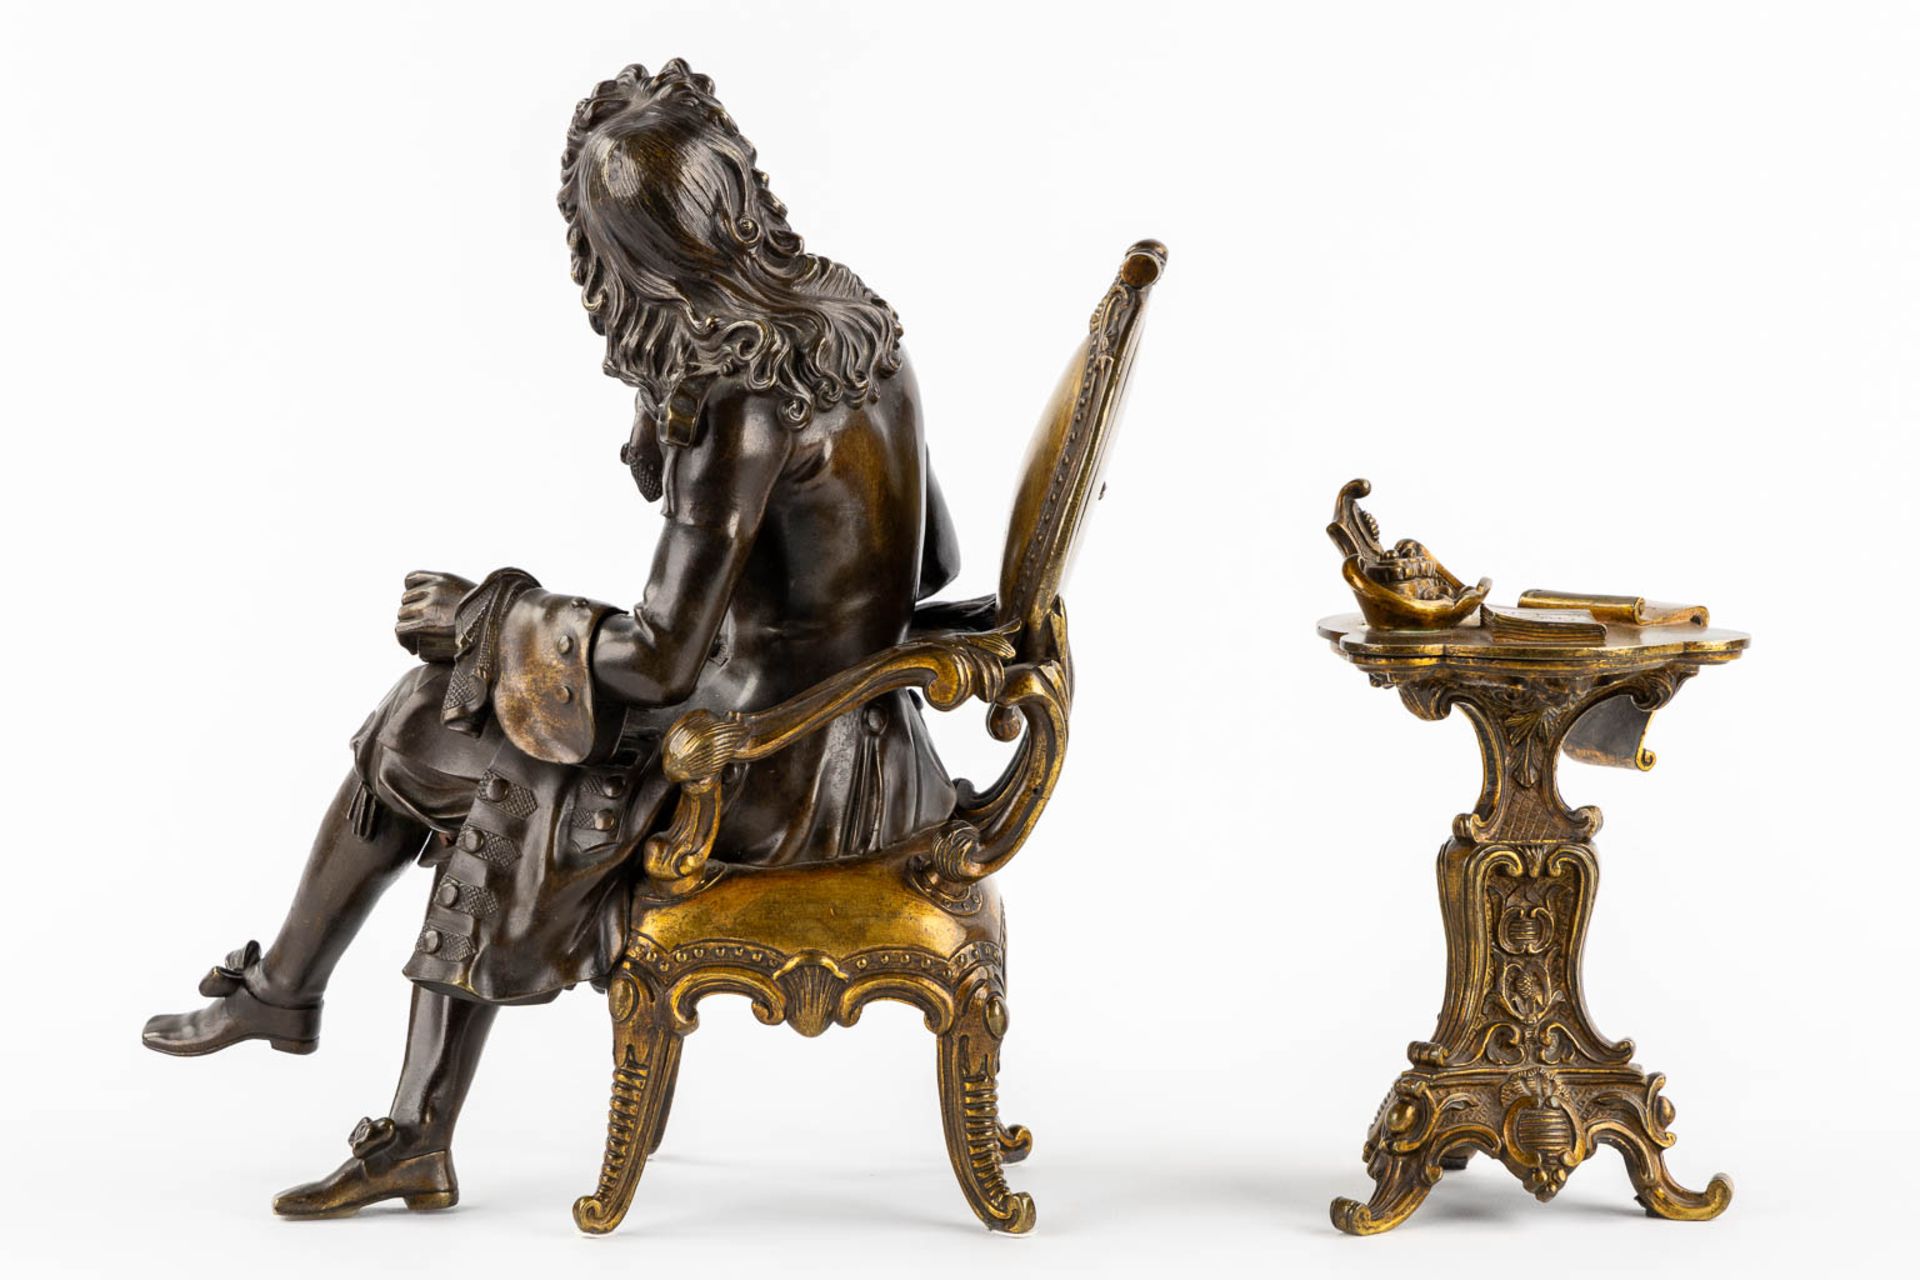 Pascal Collasse, a patinated and gilt bronze figurine. Circa 1900. (L:15 x W:25 x H:29 cm) - Image 5 of 13